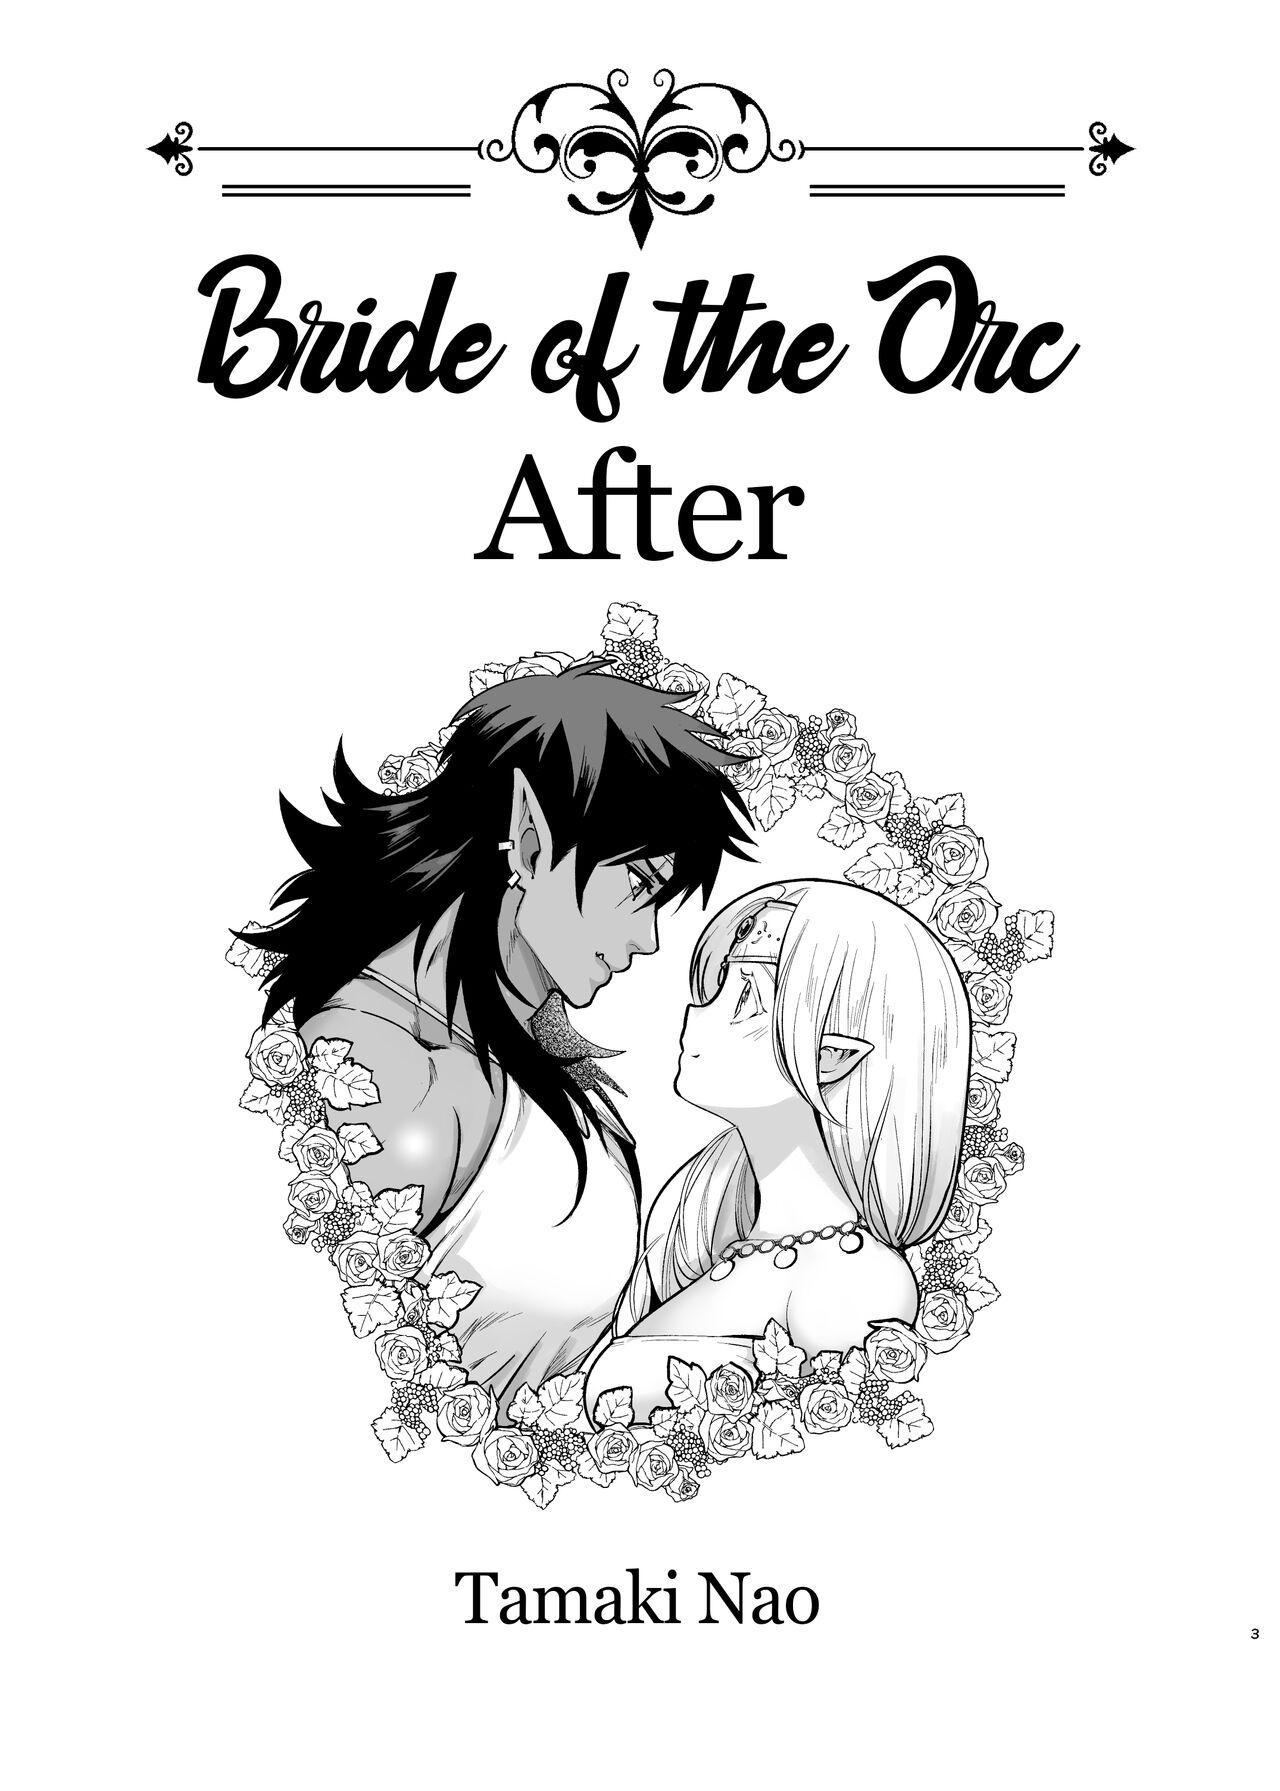 Orc no Hanayome After | Bride of the Orc After 3